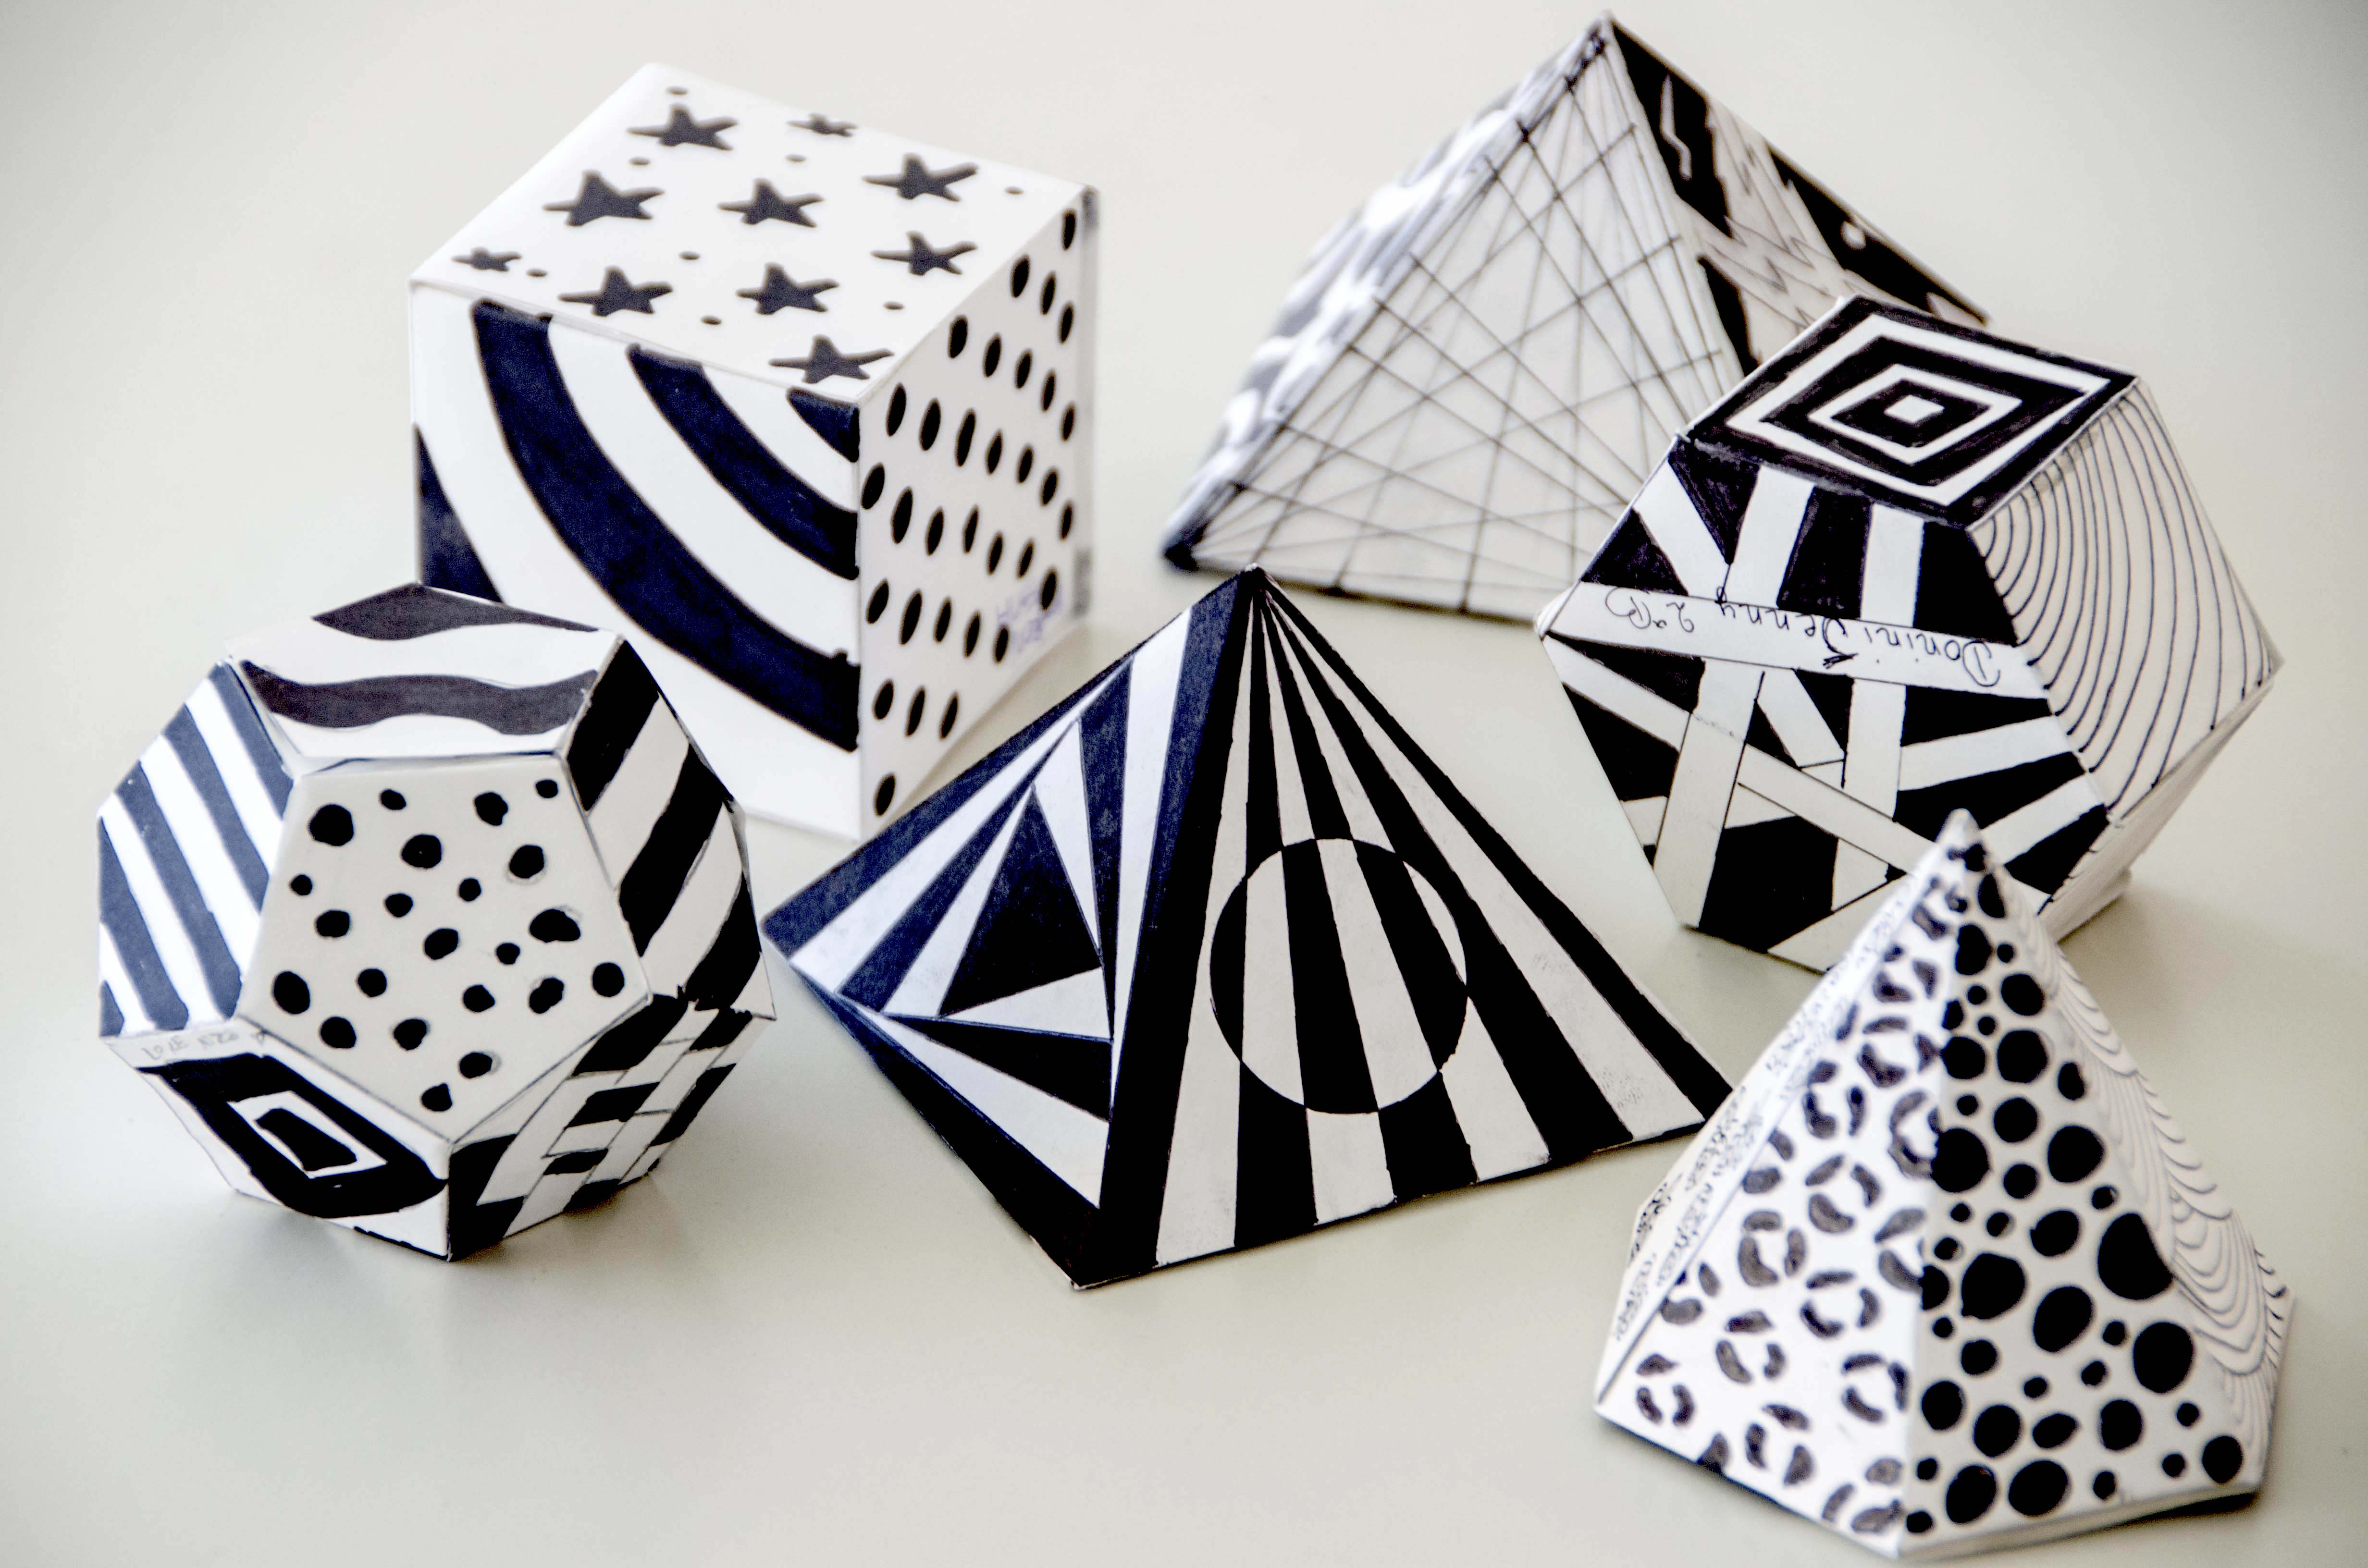 3-D Geometric Paper Shapes with Patterns – Arte a Scuola